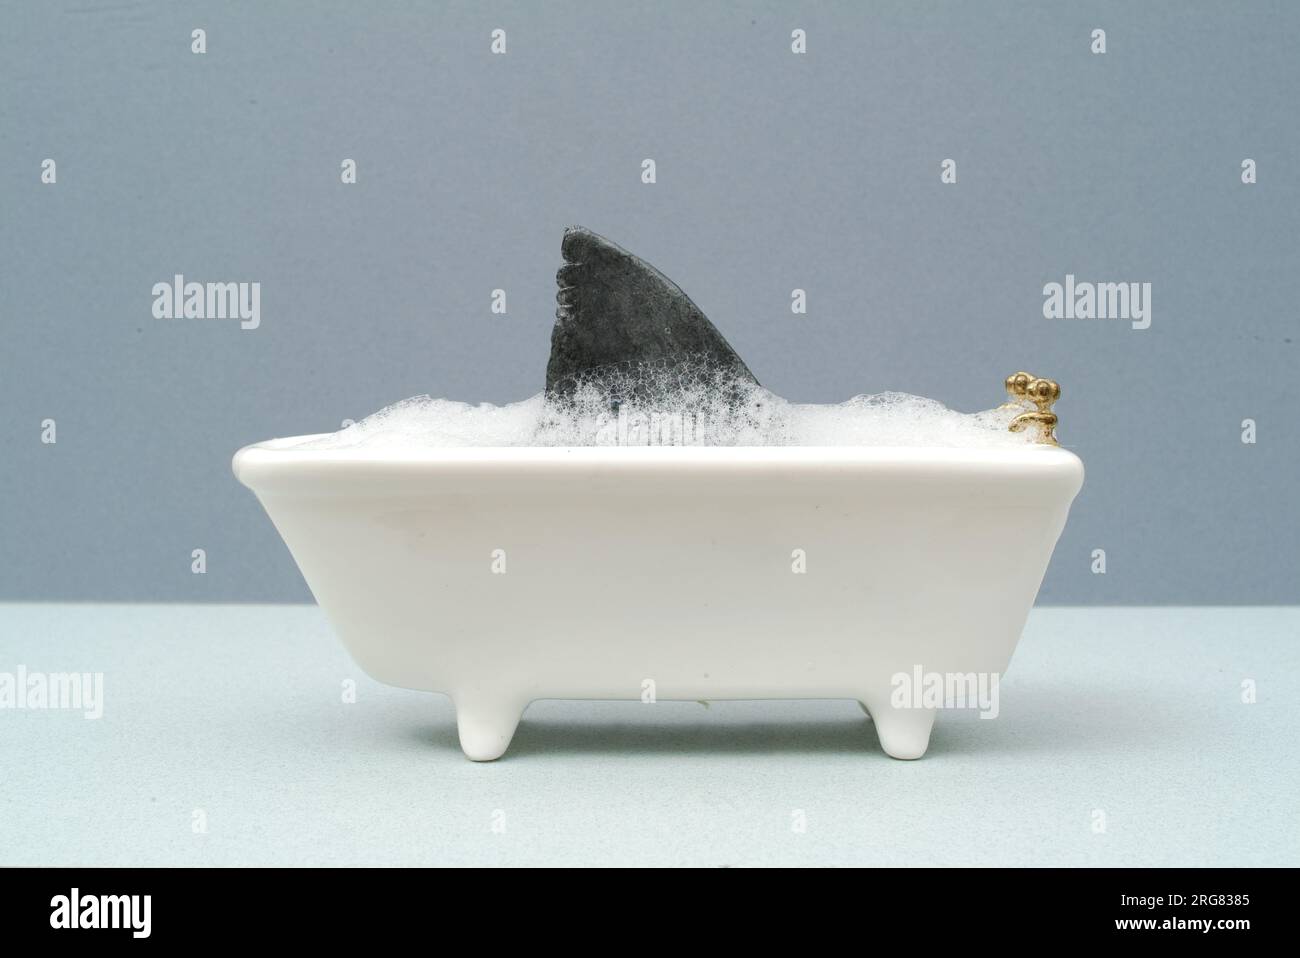 funny, alarming and unnerving image of a shark bathing in a toy bath full of bubbles. miniature bath and shark fin. Stock Photo